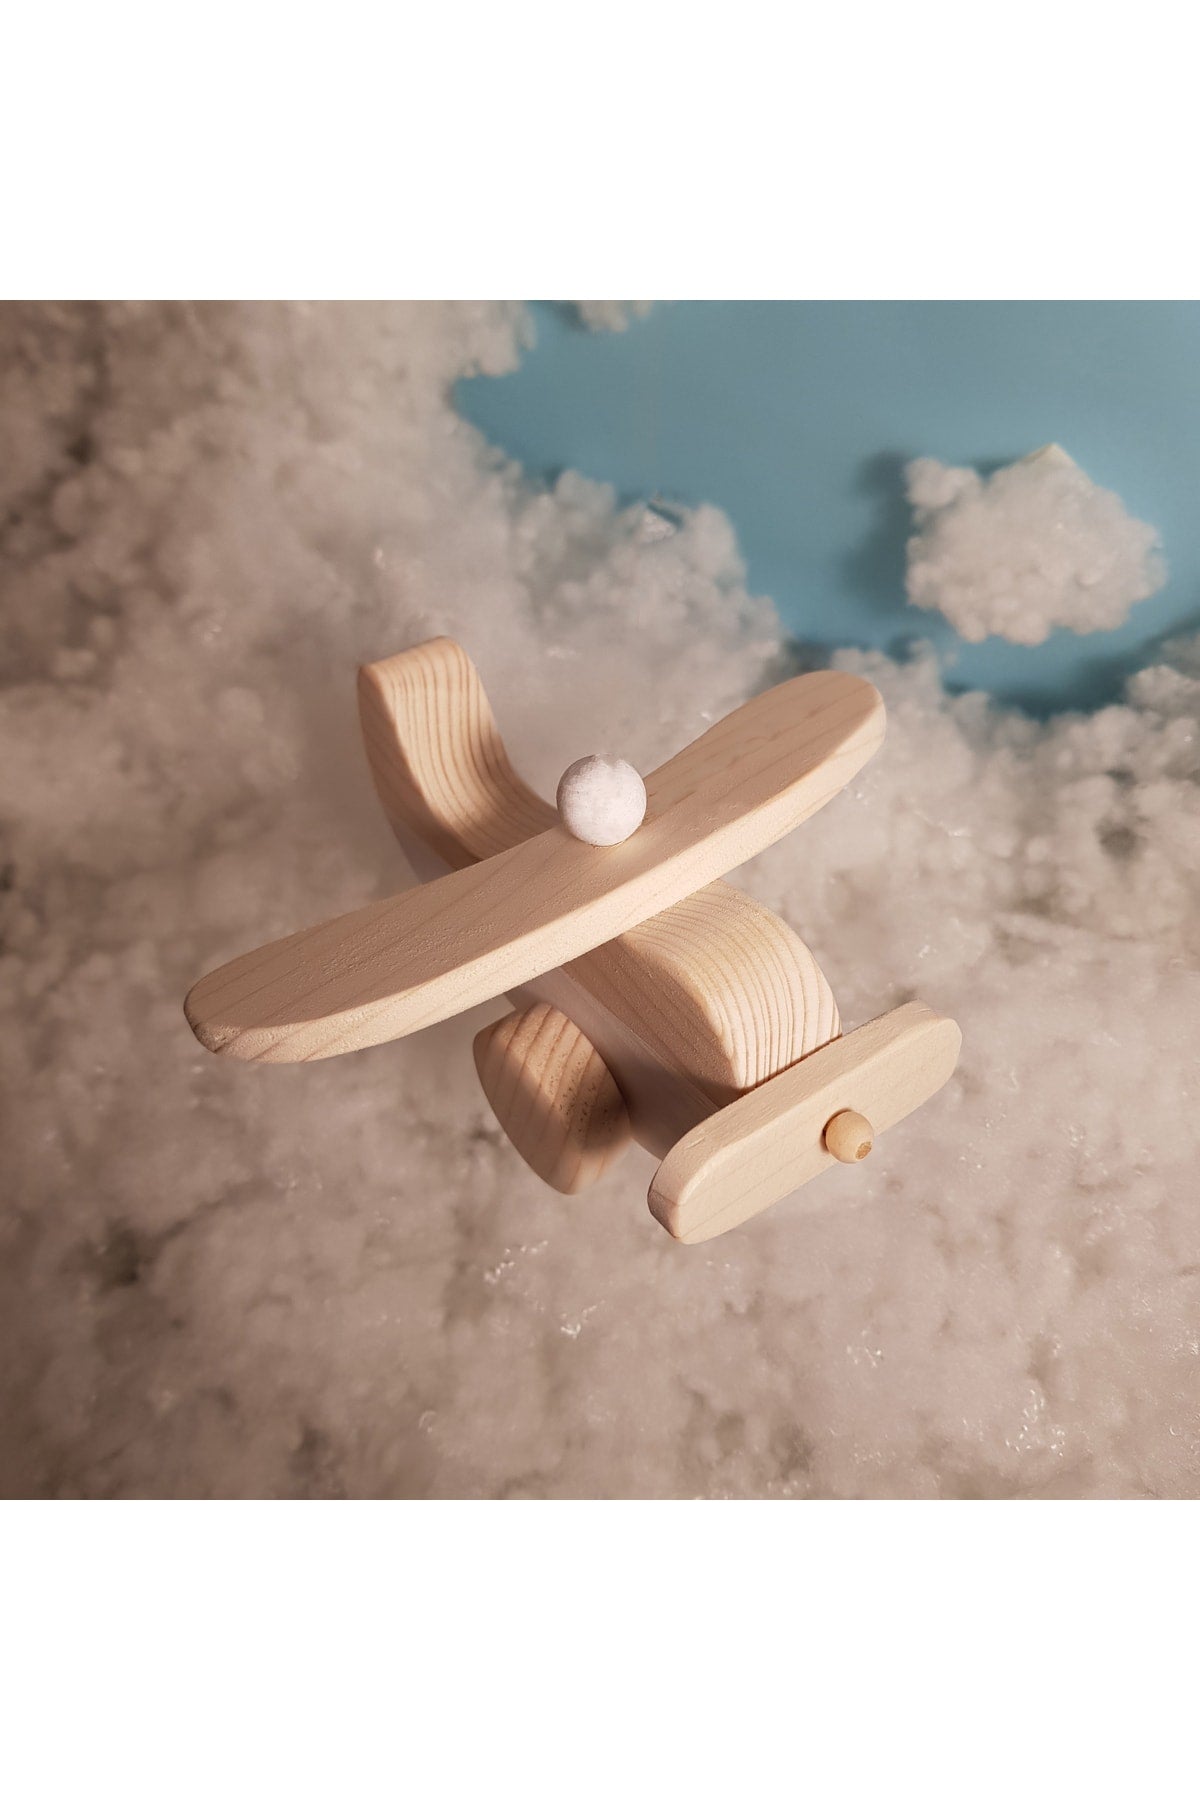 Handmade Wooden Toy Airplane, Educational, Creative, Vintage And Natural And Safe Wooden Baby Toy